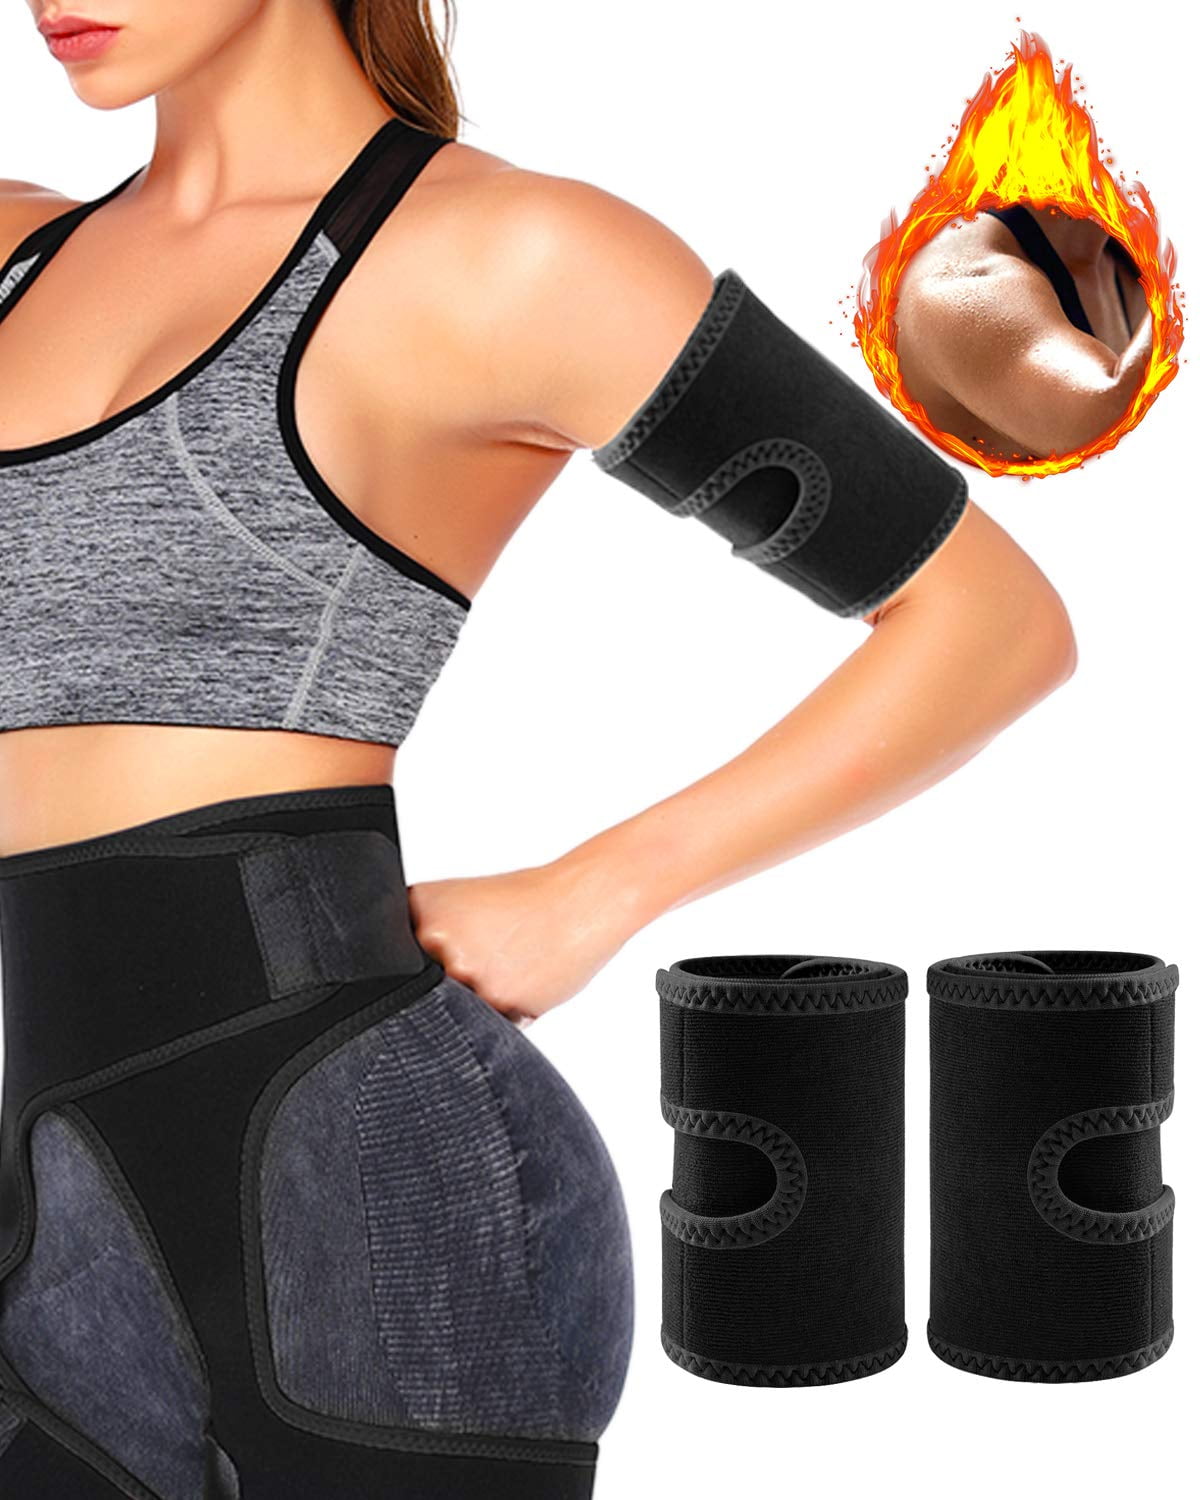 Arm Trimmers Wraps for Slimmer Arms-Lose Fat Neoprene Gym Armbands Fat Burning 